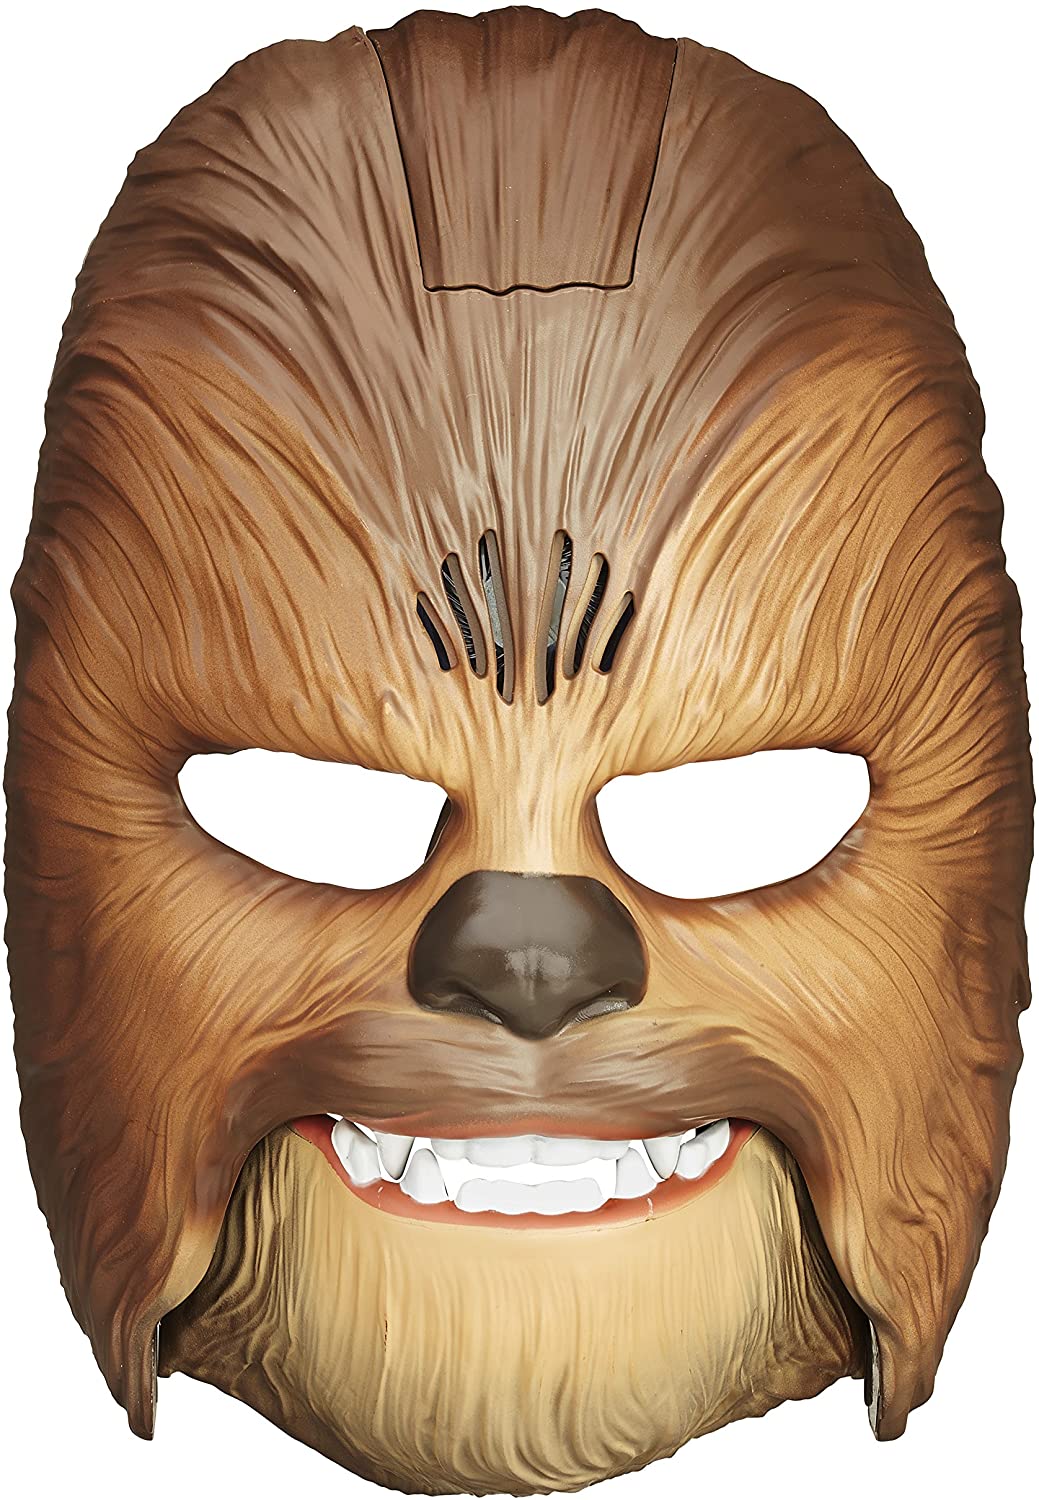 Star Wars Movie Roaring Chewbacca Wookiee Sounds Mask $21 + Free Shipping w/ Prime or on $25+